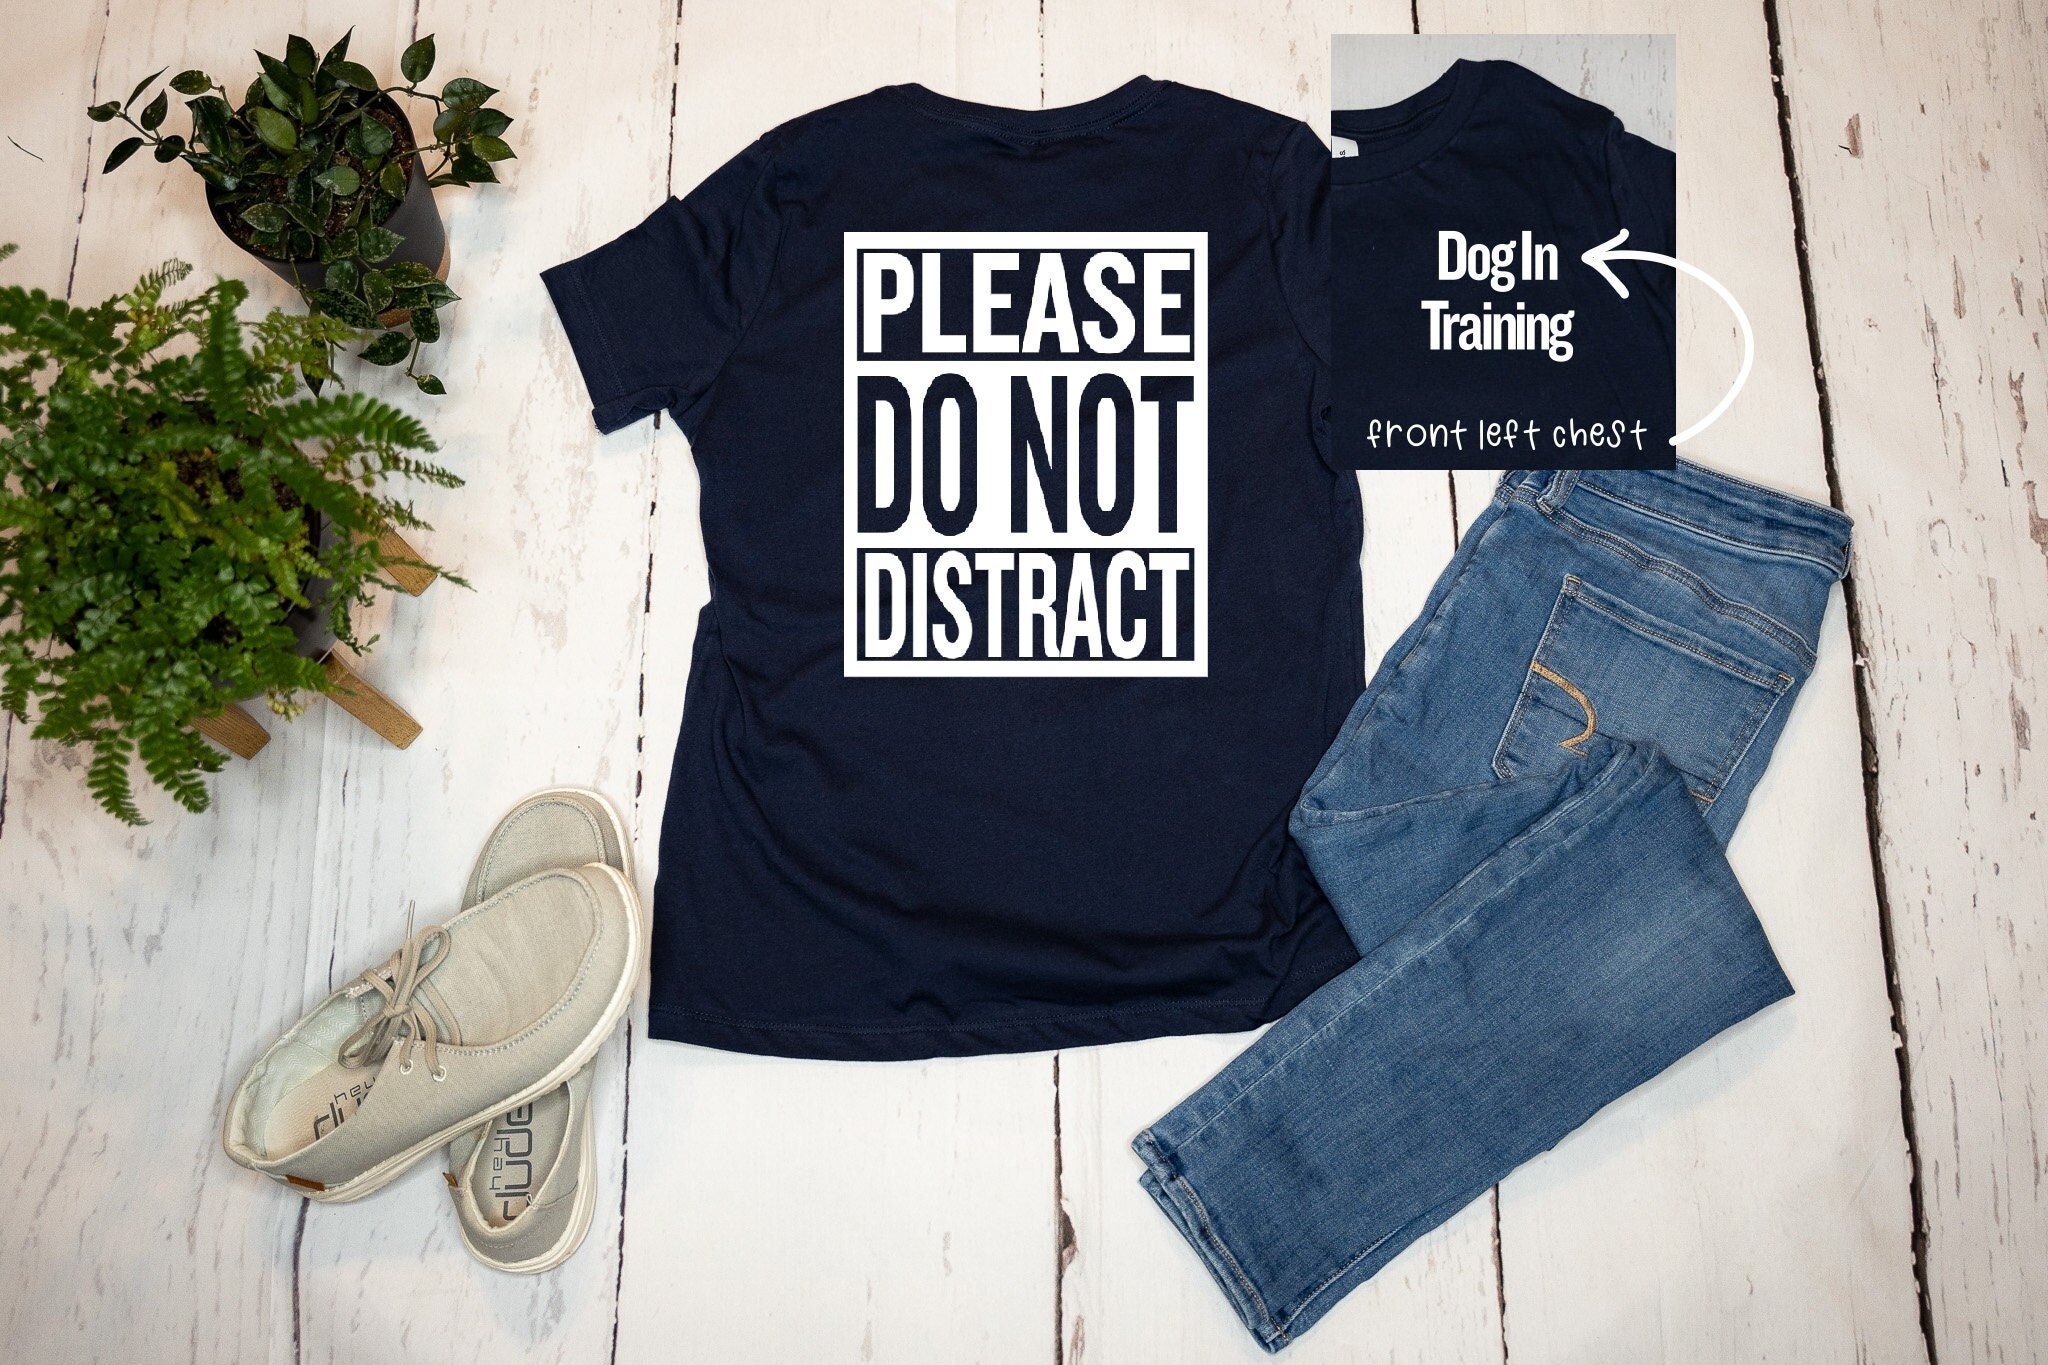 DO NOT PET Words Slogan Patch Embroidered Iron On Patch Sew On Badge  Applique For T Shirts